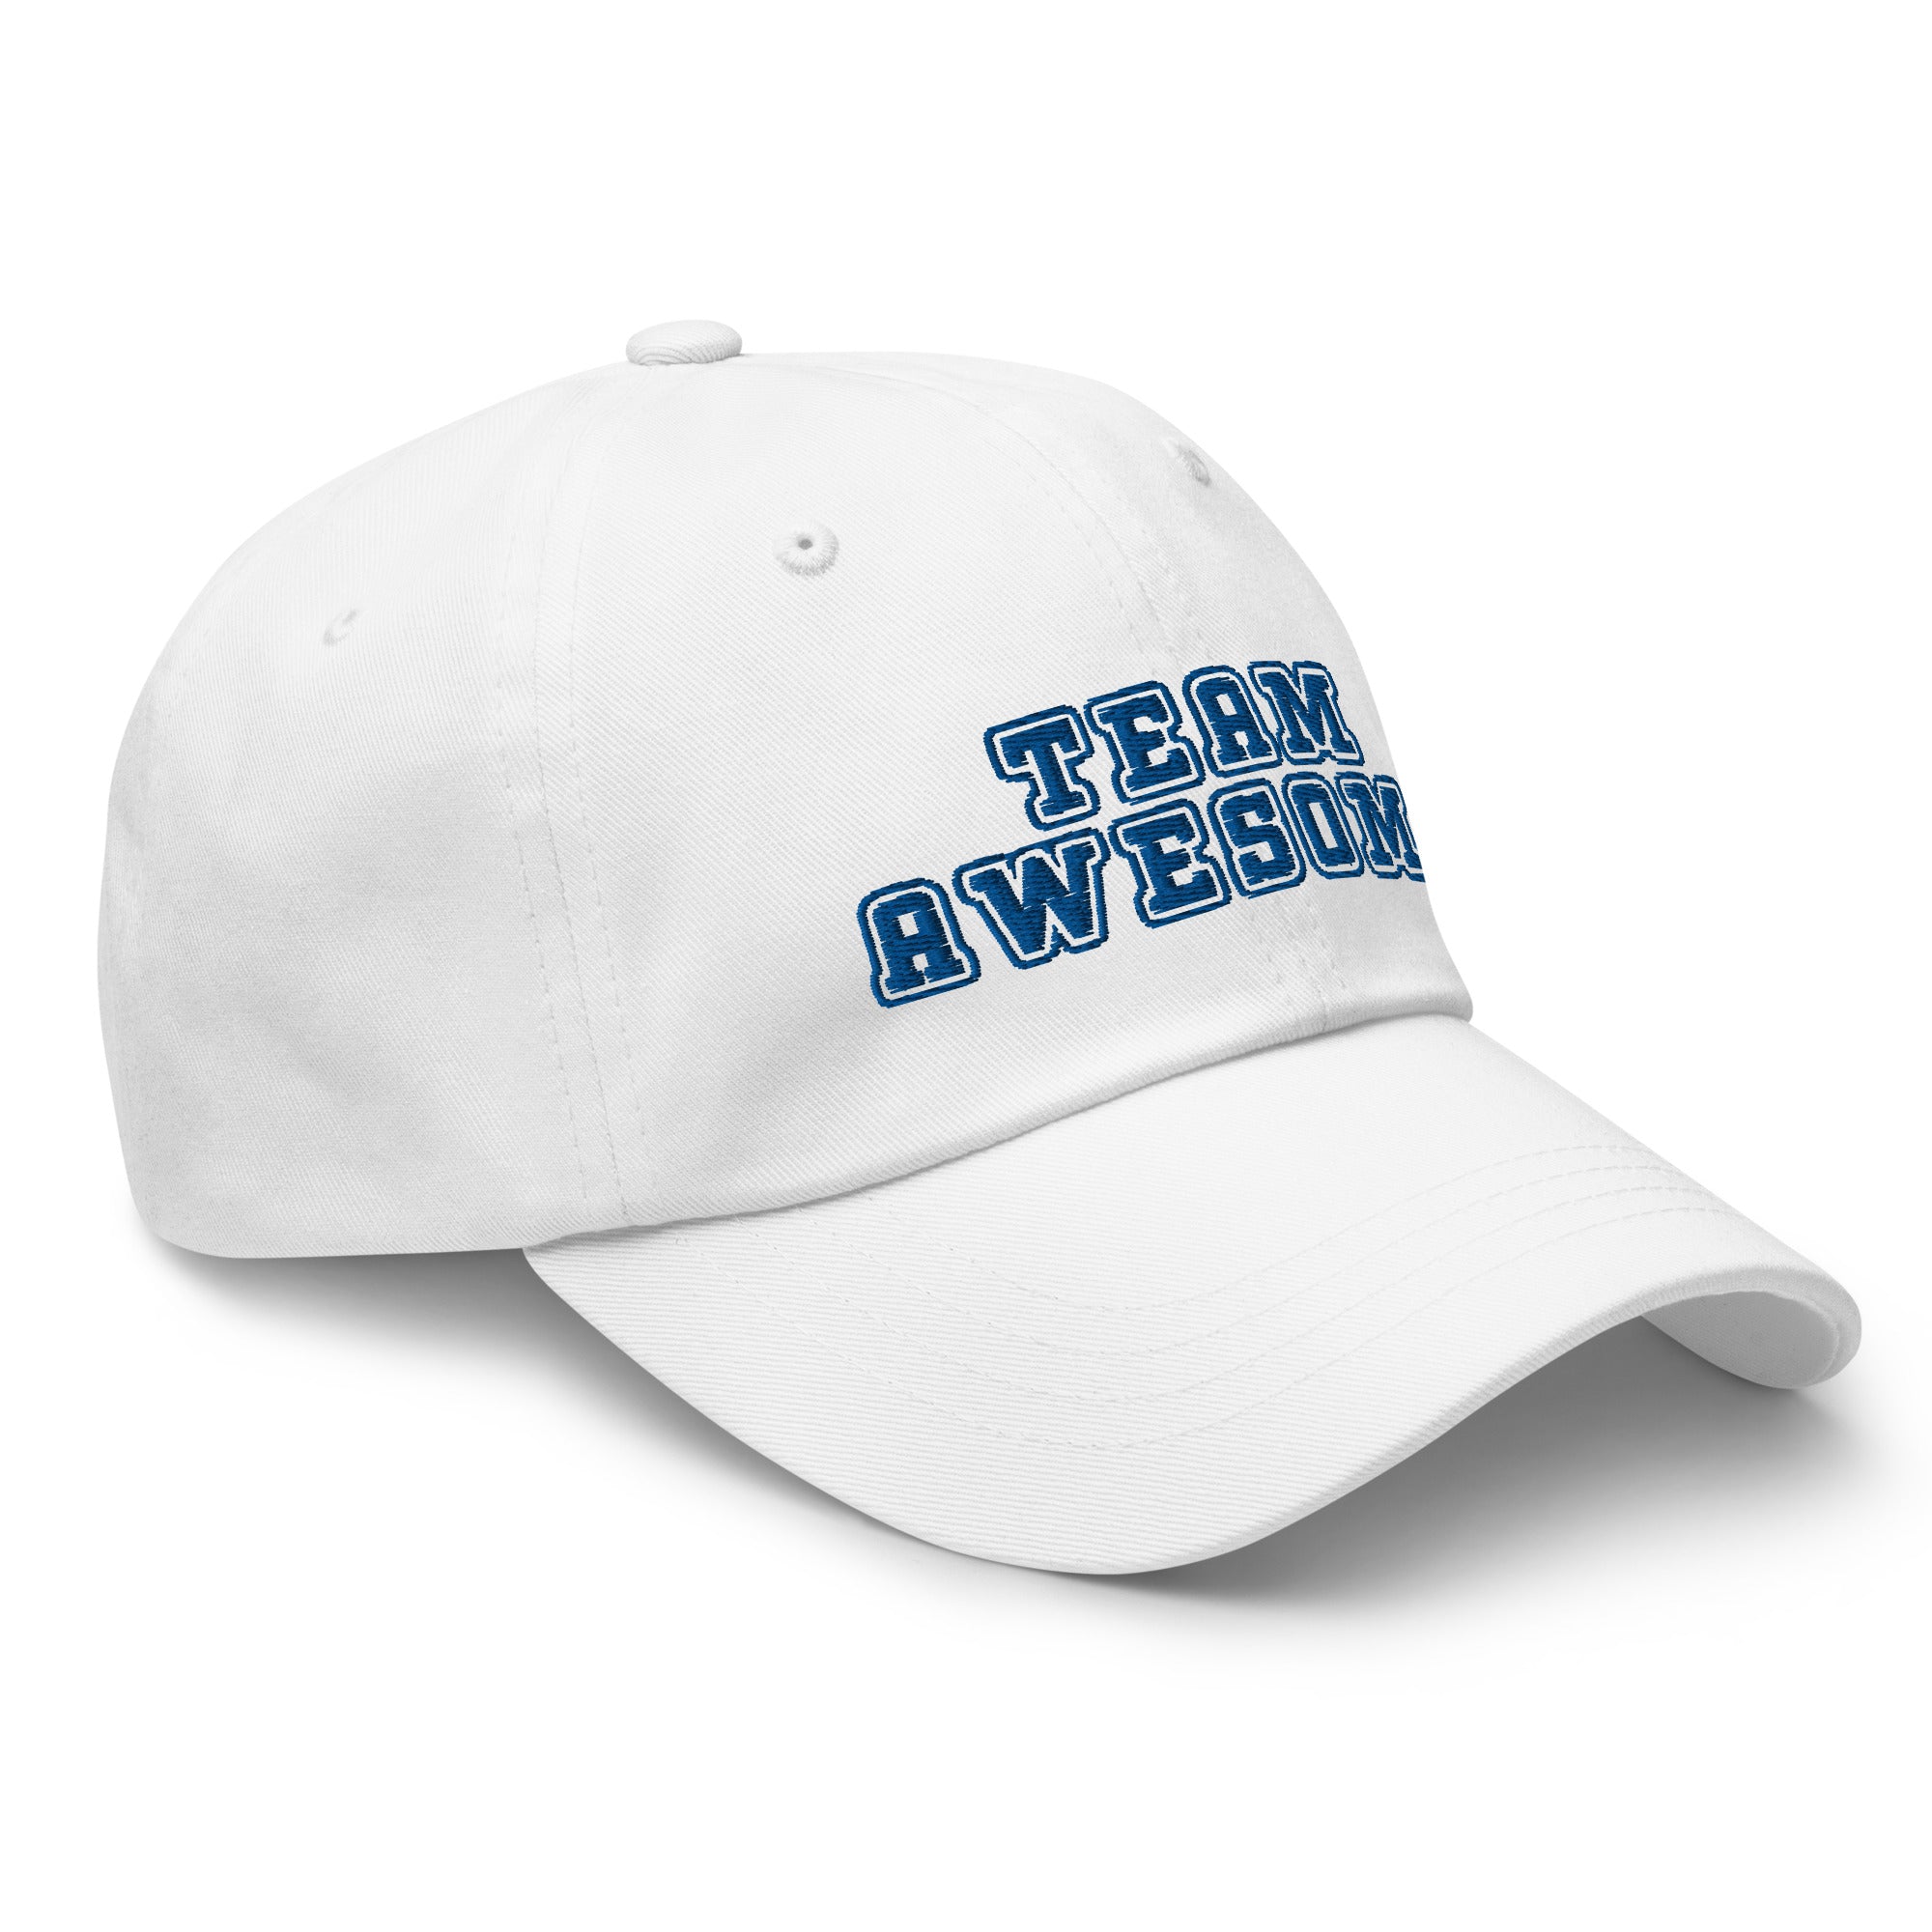 Team Awesome Hat - White